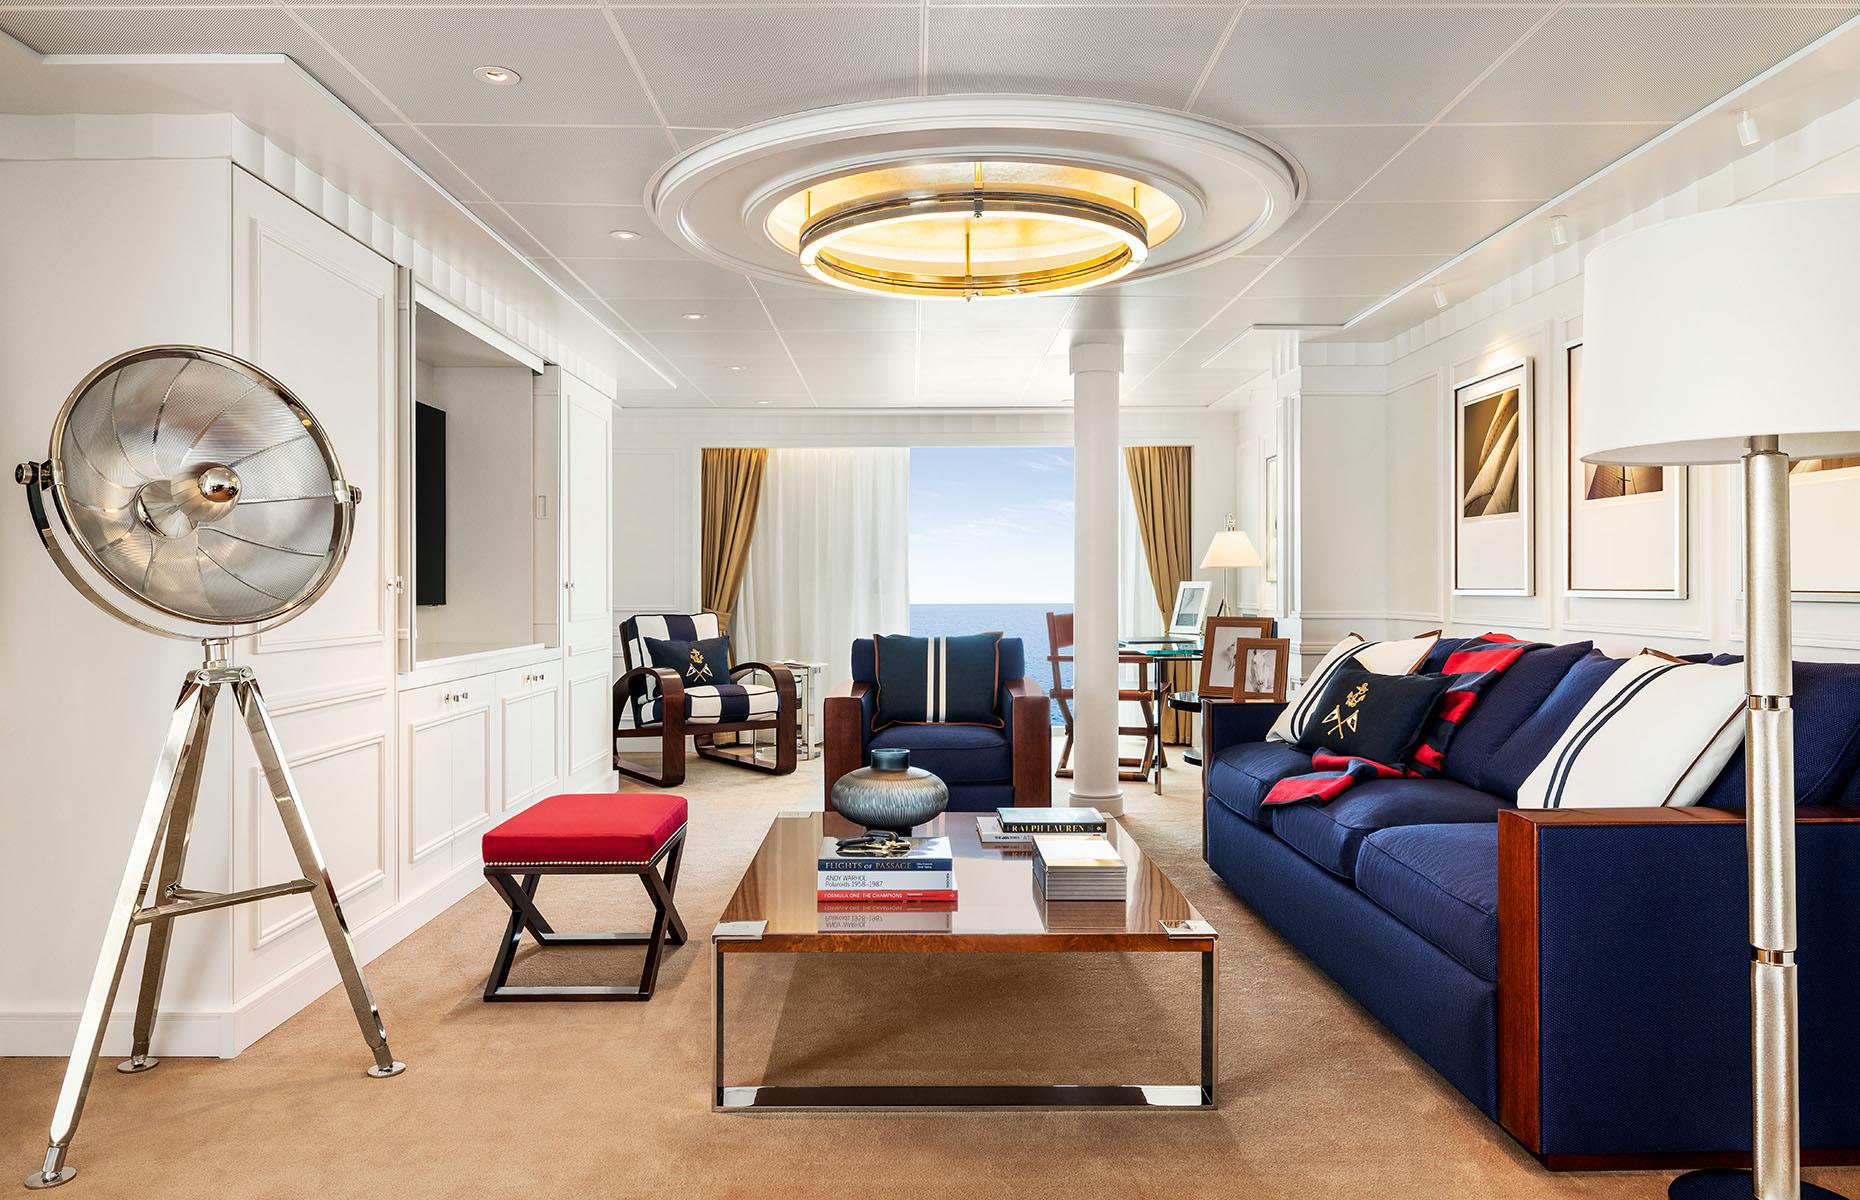 <p>The nautical-themed Owner's Suite is Vista's finest and largest stateroom, at between 2,200 and 2,400-square-feet (204-223sqm). The space includes an office, a lounge area (with cashmere lap blankets, of course), a dining room and a bedroom with its very own fully-fitted dressing room. The suite even has a full-sized stocked bar, where your 24-hour butler can whip you up a cocktail or two. If you're lucky enough to bag yourself one of these premium staterooms, you'll also gain unlimited access to the Aquamar Spa Terrace. </p>